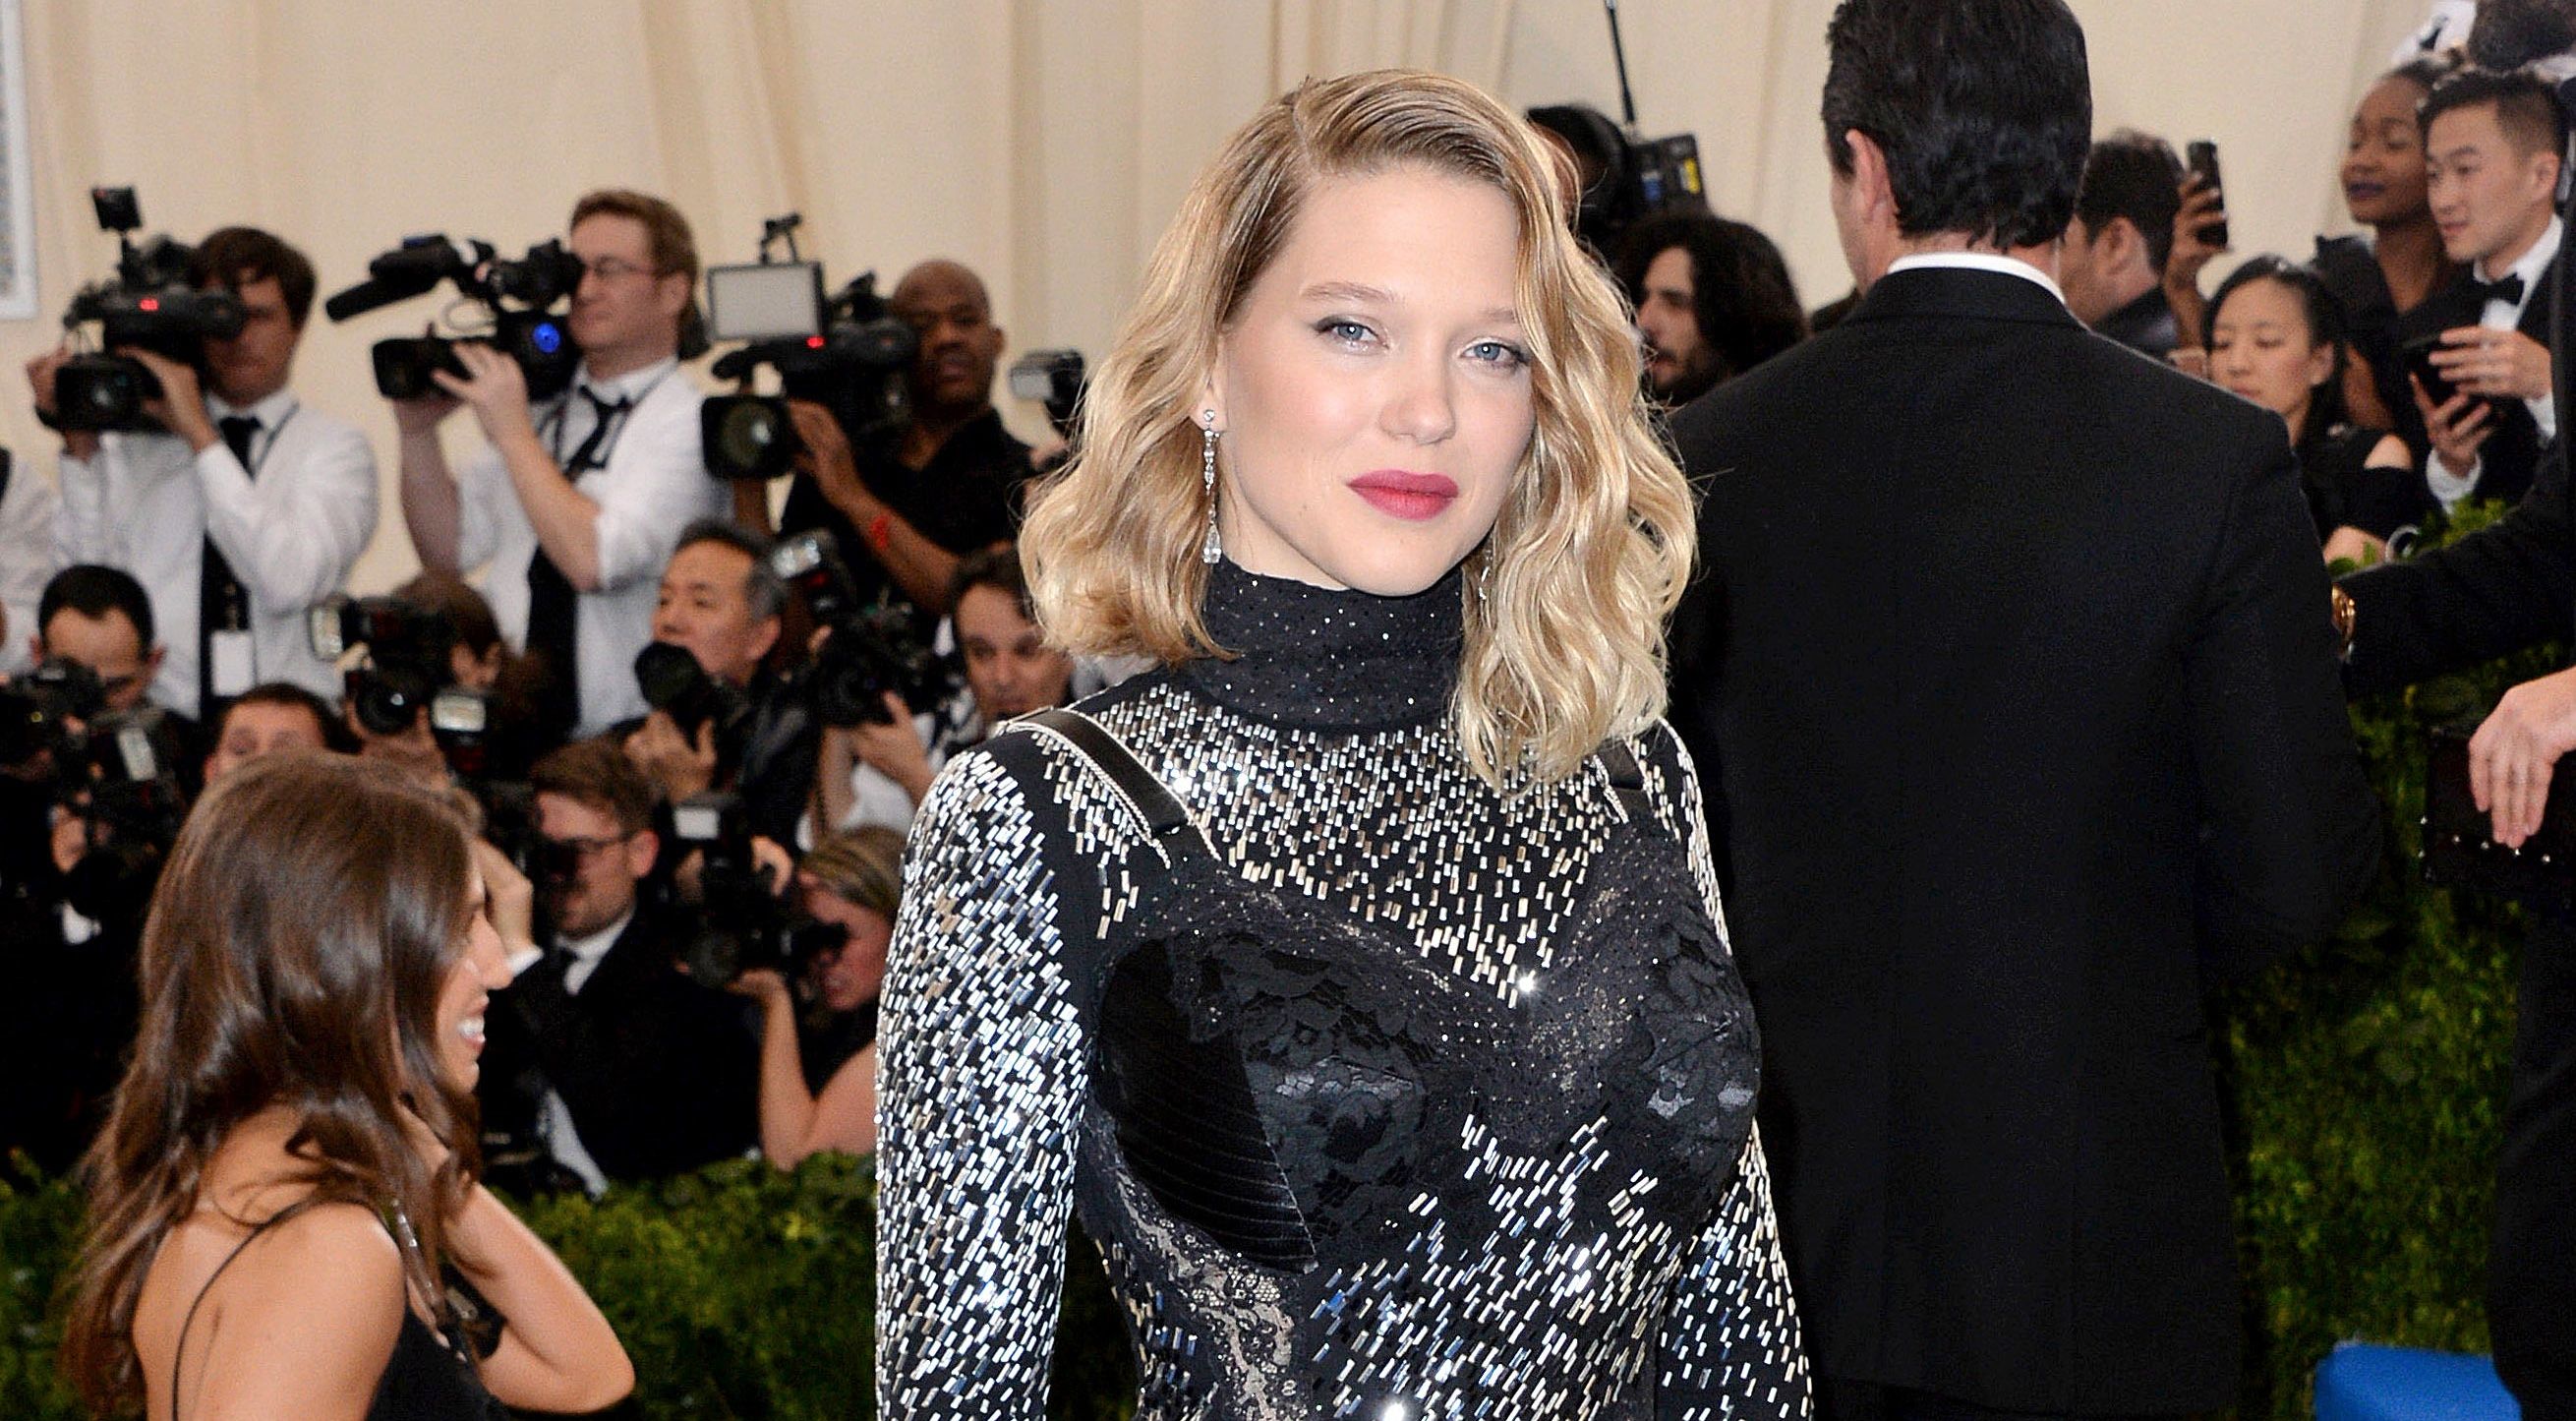 Who is Lea Seydoux, what did she say about Harvey Weinstein and